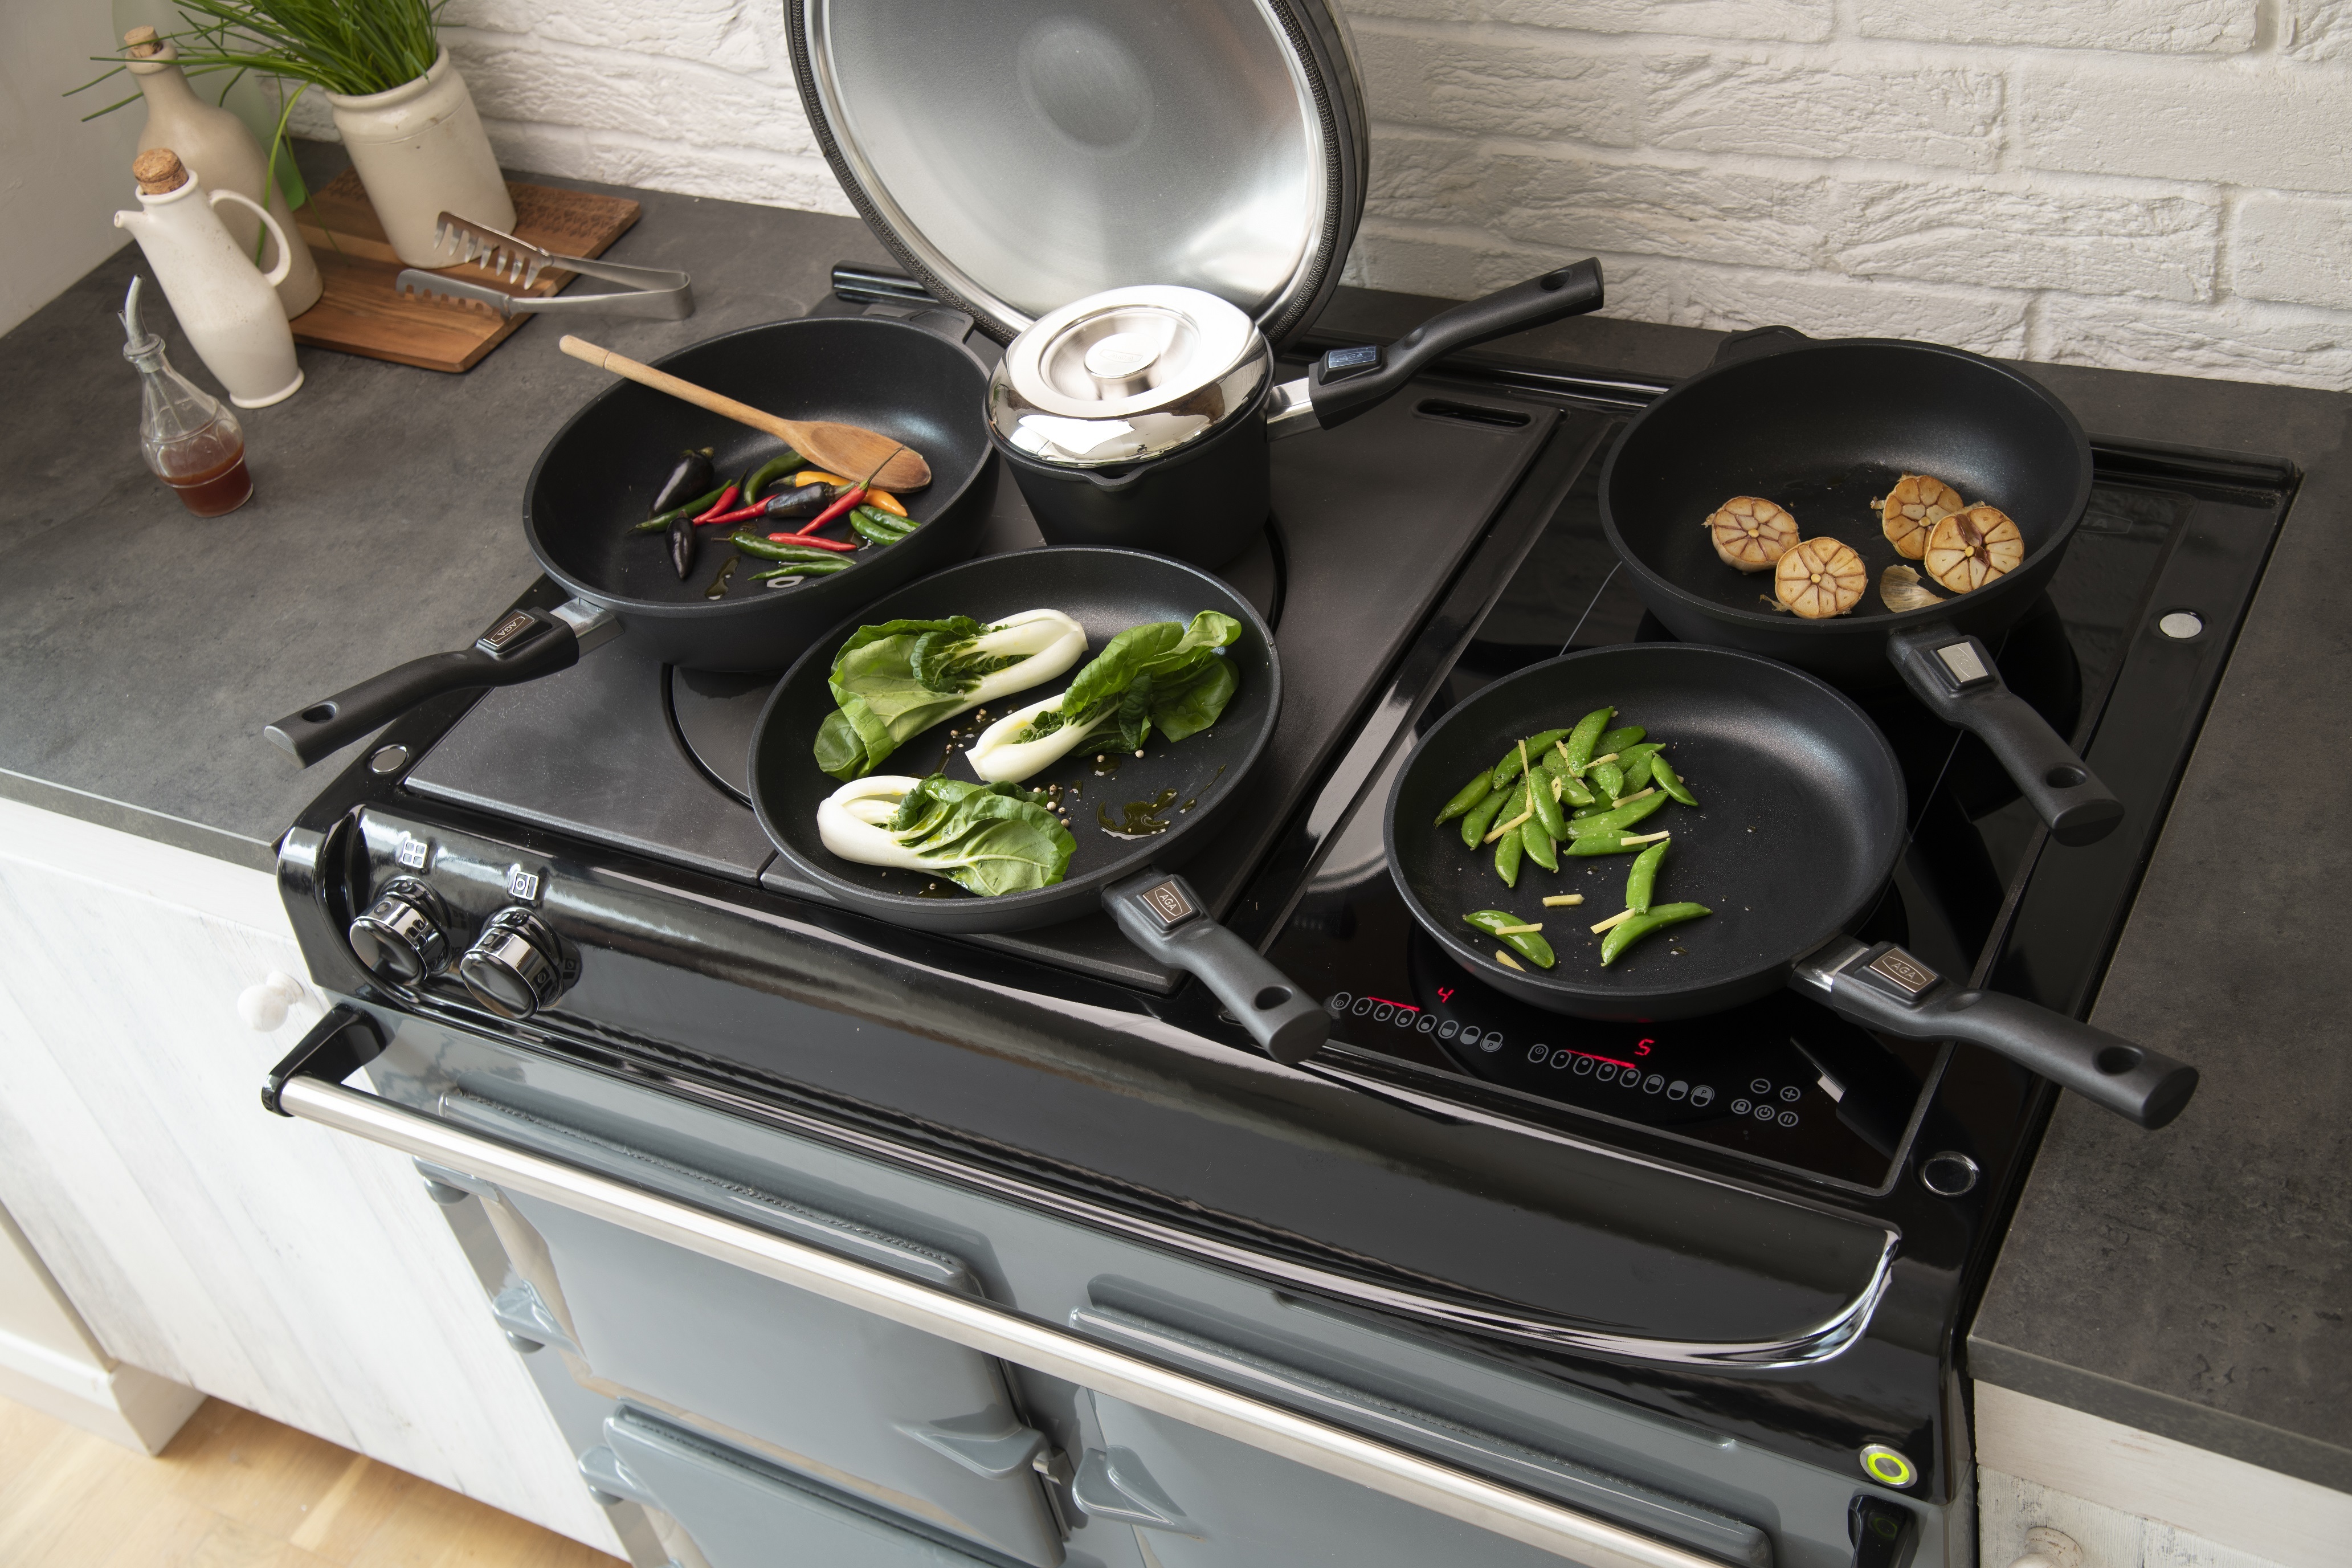 Three Reasons Why Your Kitchen Needs An Aga Cooker